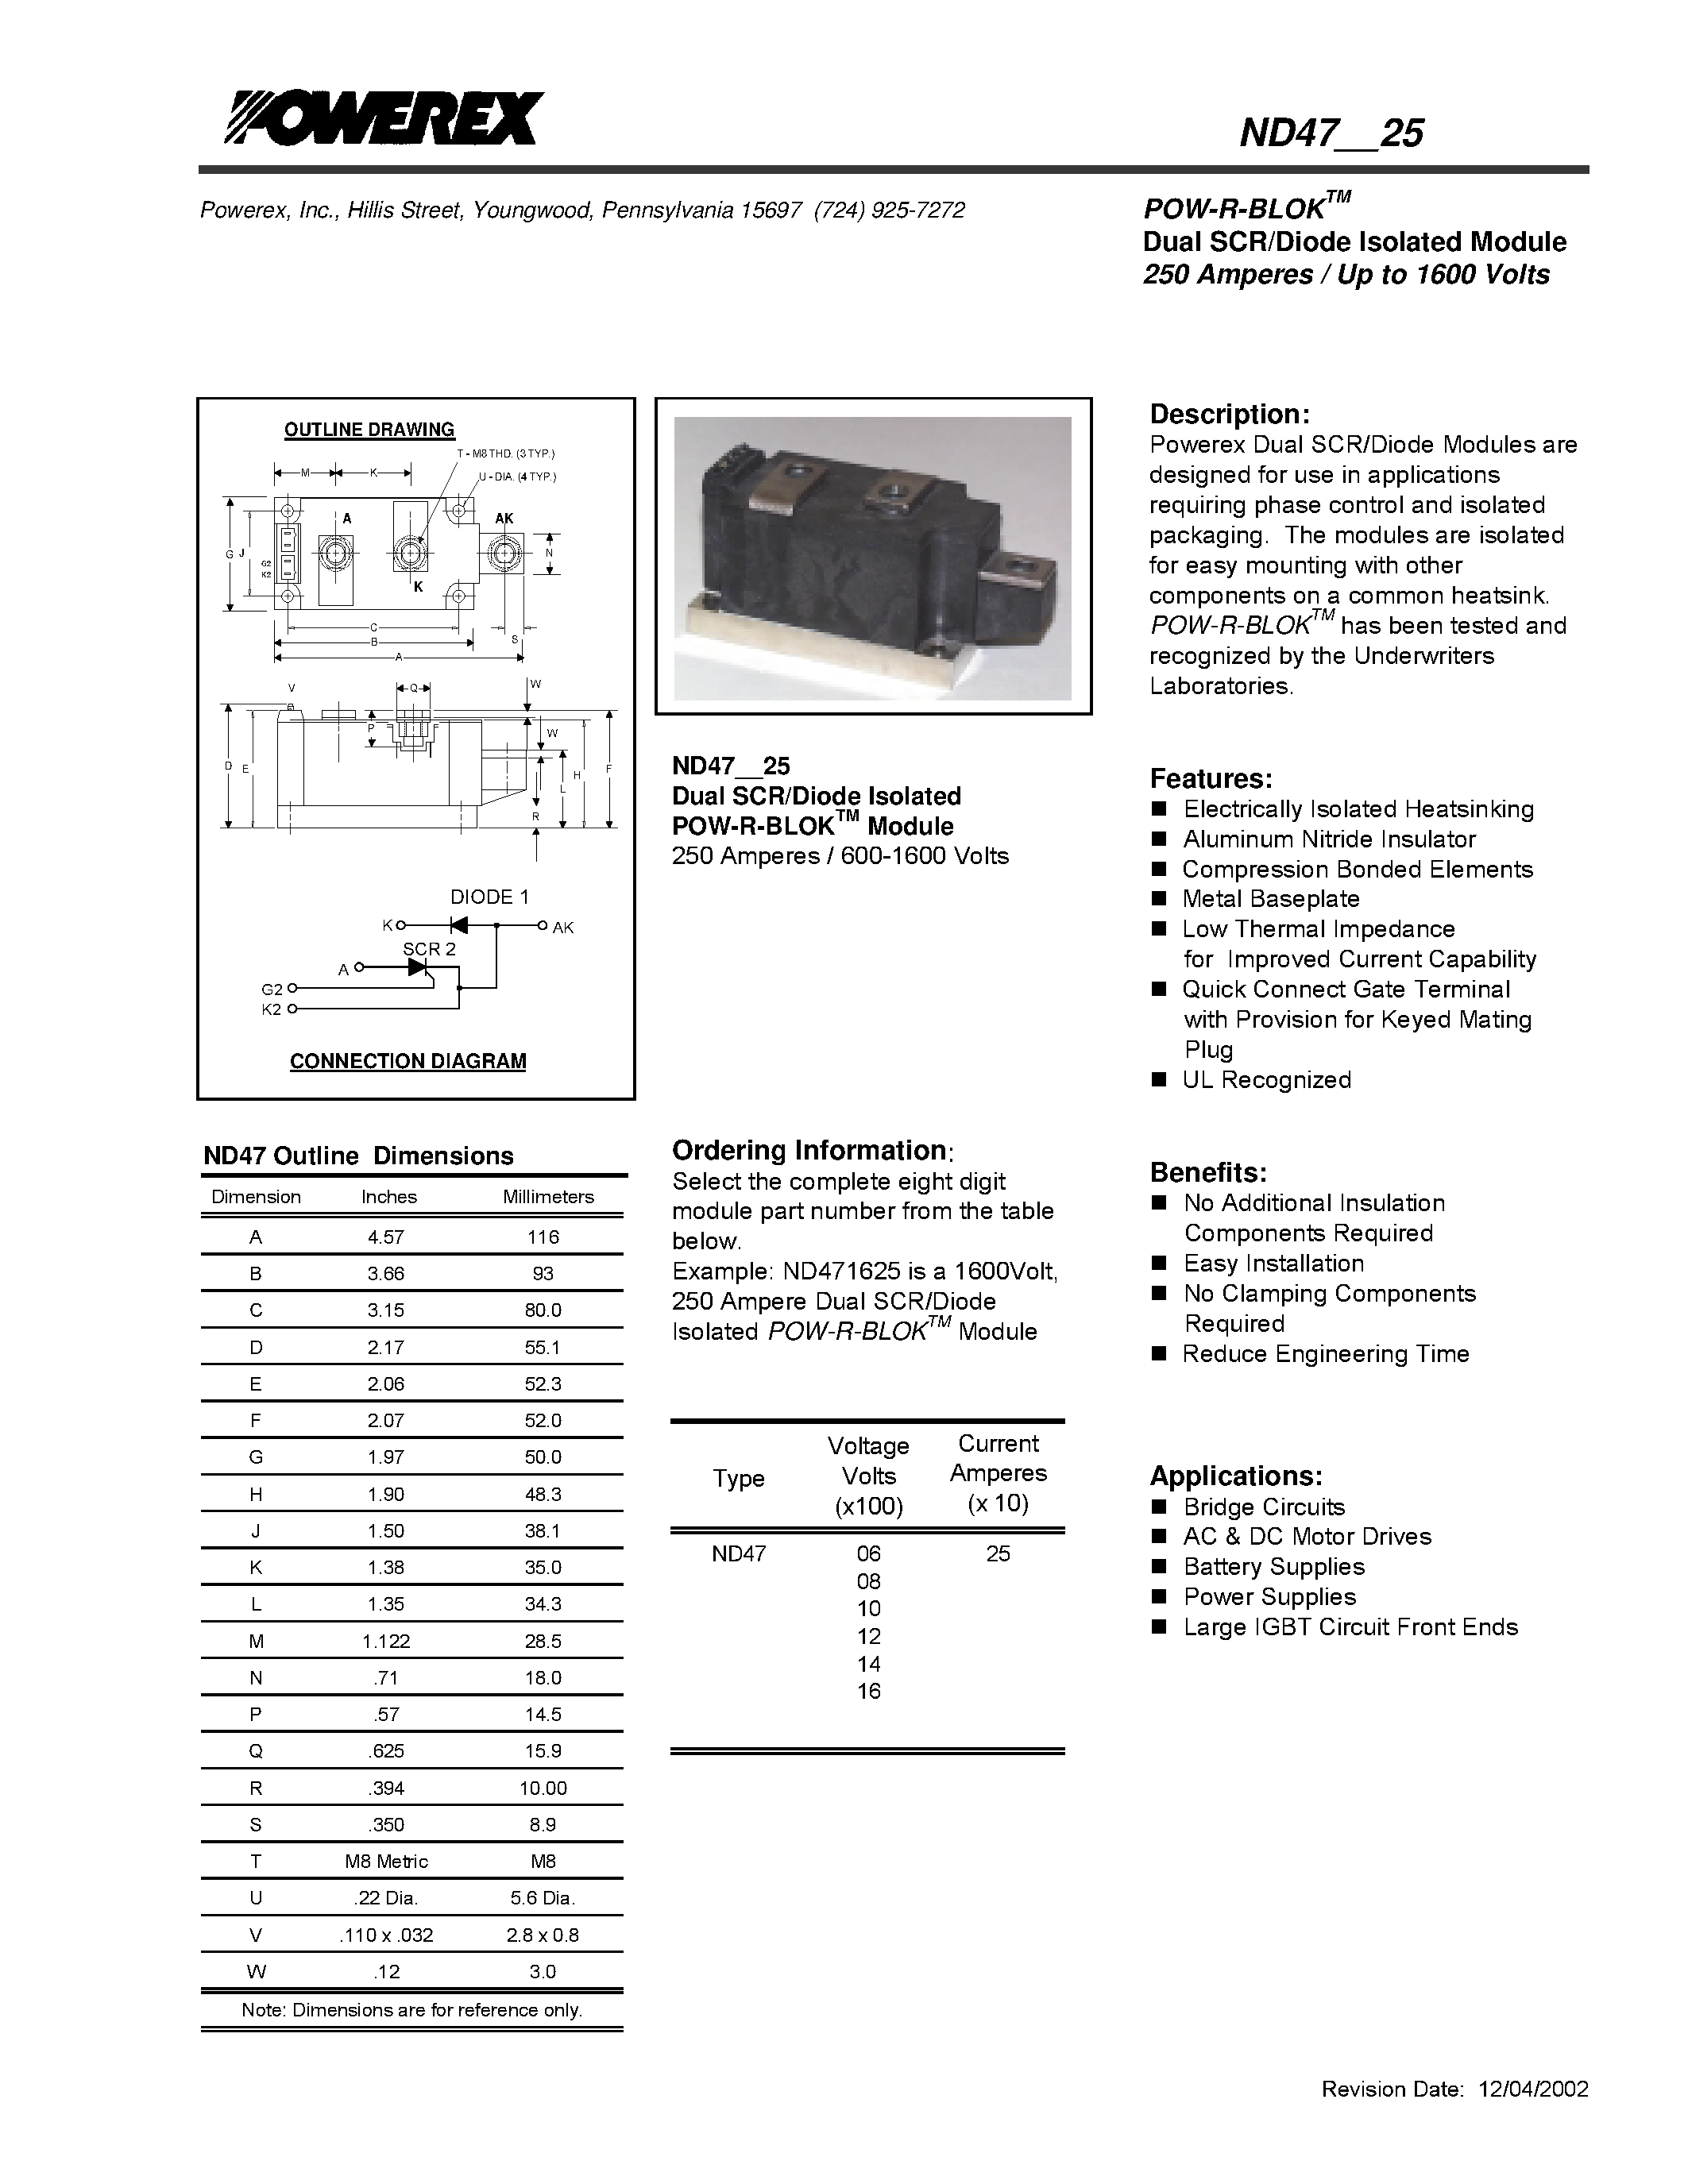 Datasheet ND471625 - POW-R-BLOK Dual SCR/Diode Isolated Module (250 Amperes / Up to 1600 Volts) page 1